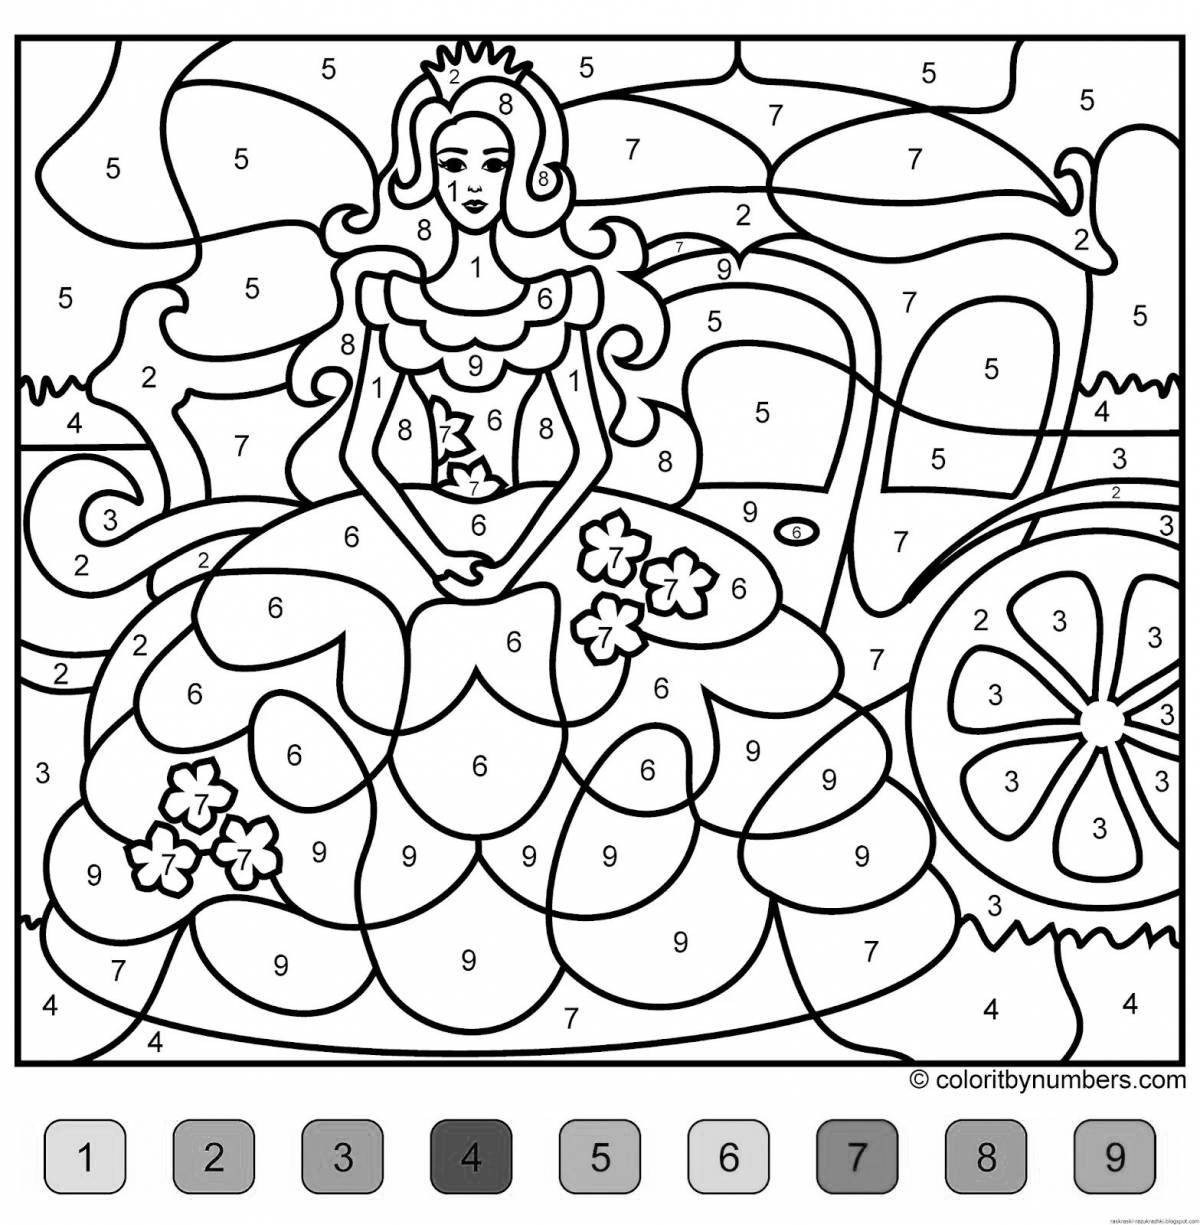 Fun coloring without paint by numbers